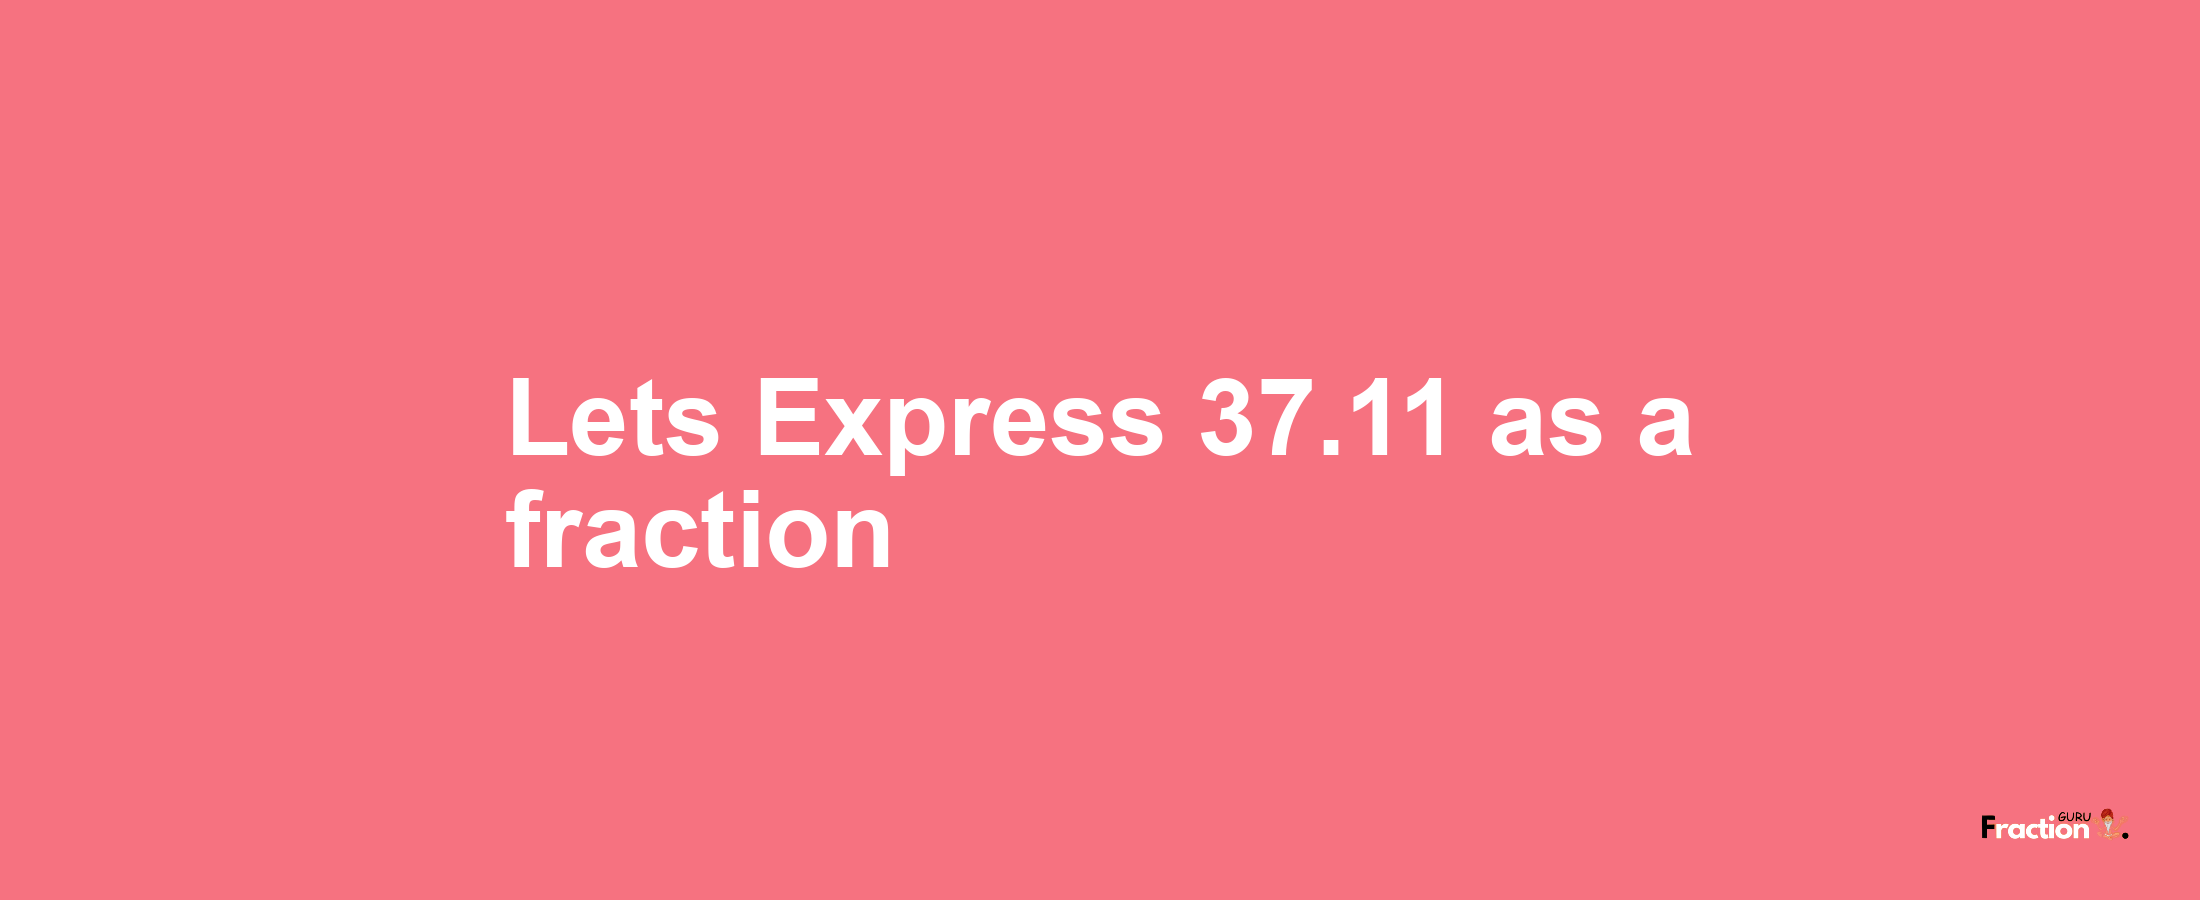 Lets Express 37.11 as afraction